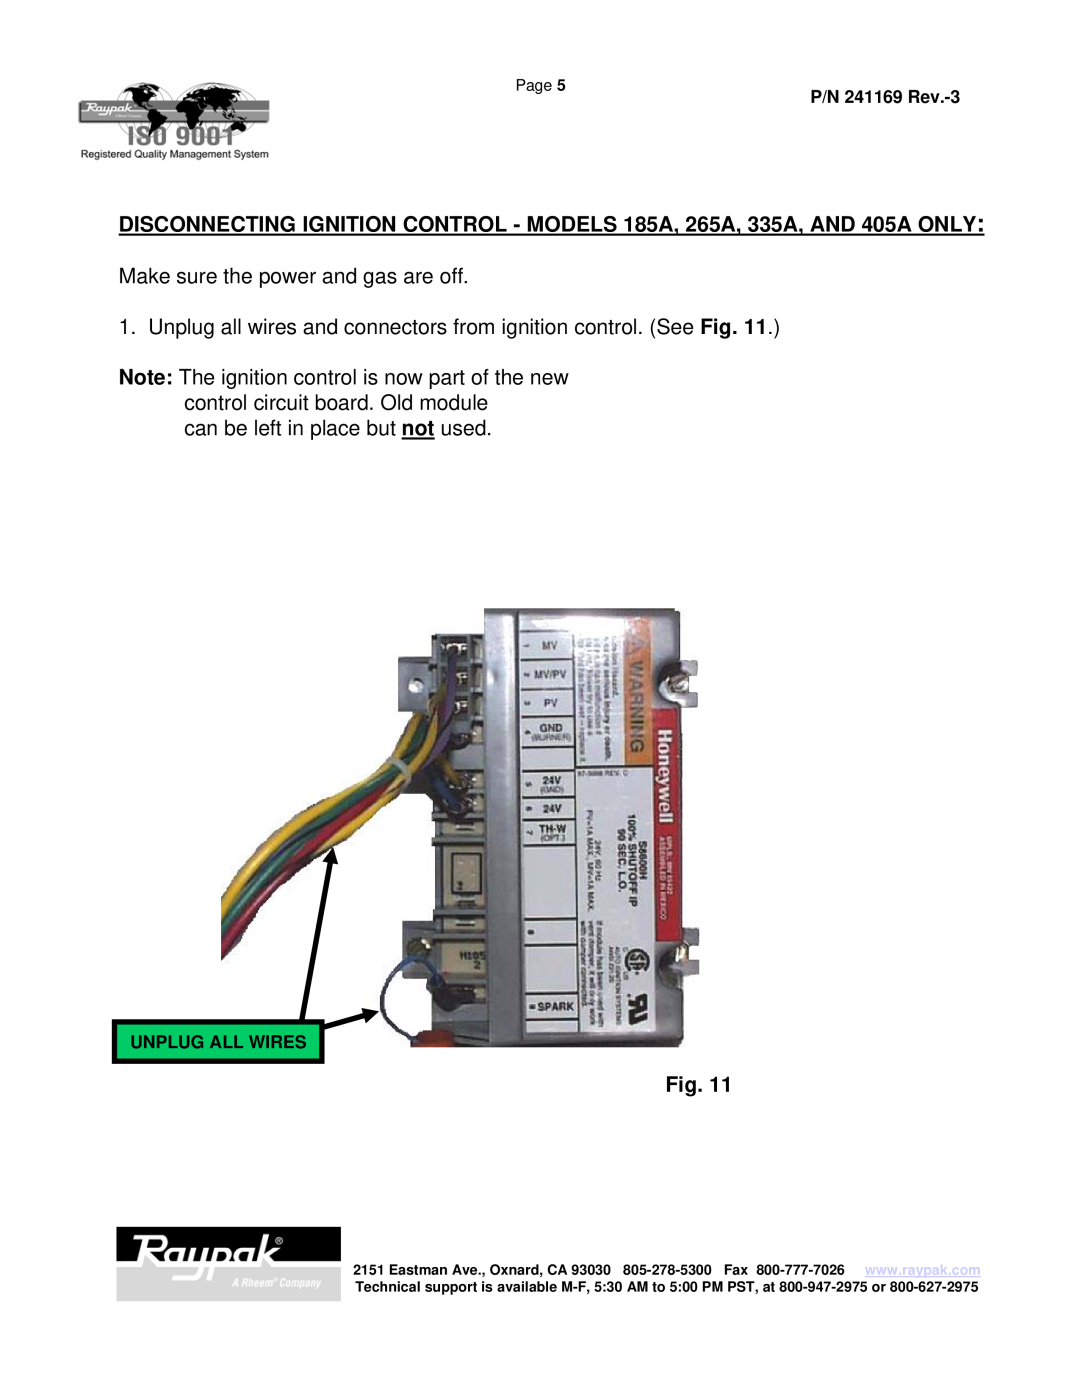 Raypak 185A manual Make sure the power and gas are off, Unplug all wires and connectors from ignition control. See Fig 